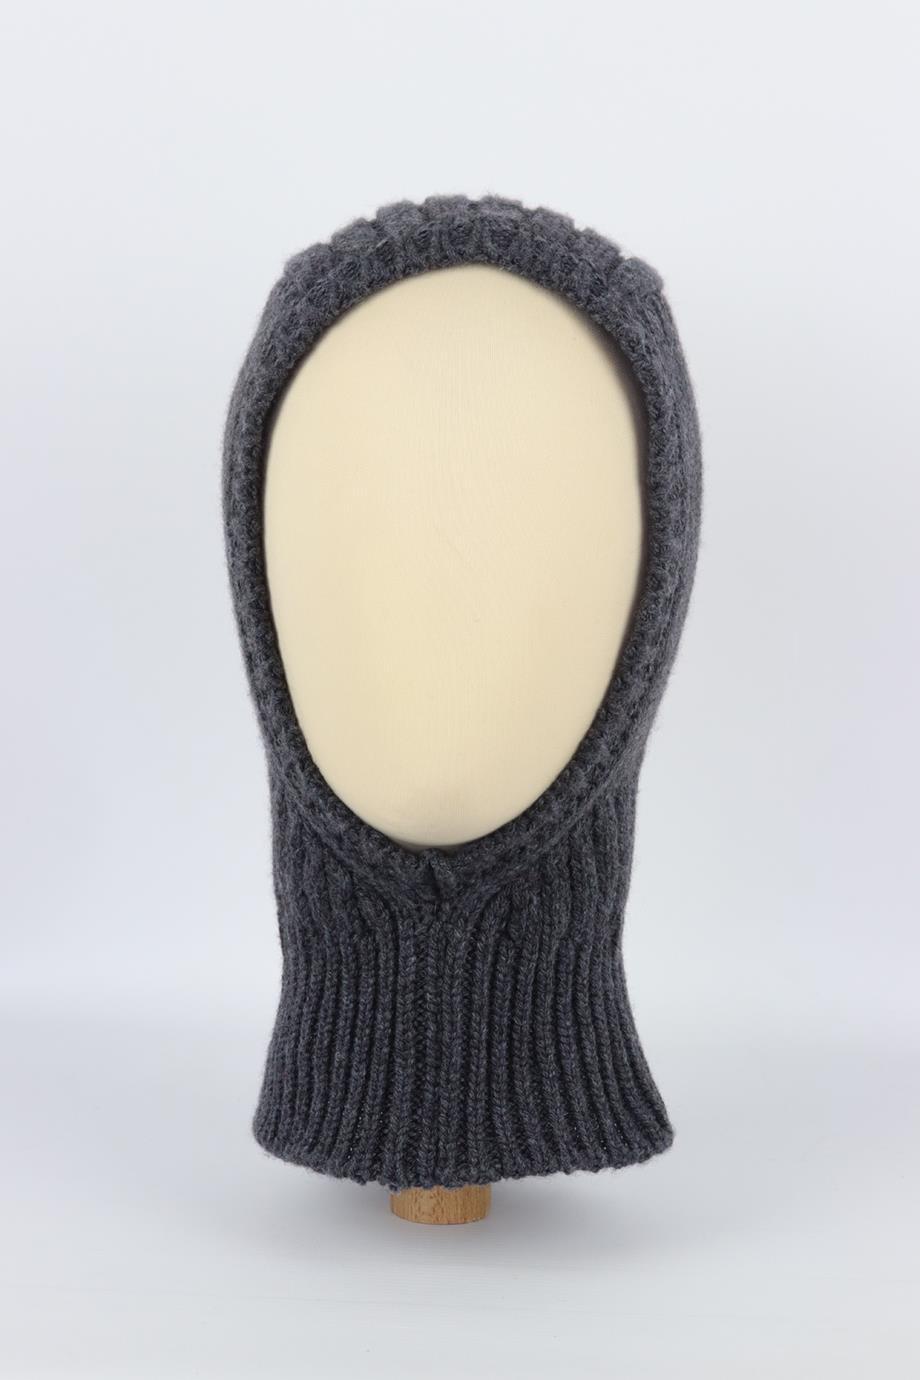 The Row ribbed knit cashmere balaclava. Grey. Pull on. 100% Cashmere. Size: XSmall-Small. Circumference: 21.3 in. Very good condition - No signs of wear; see pictures.
